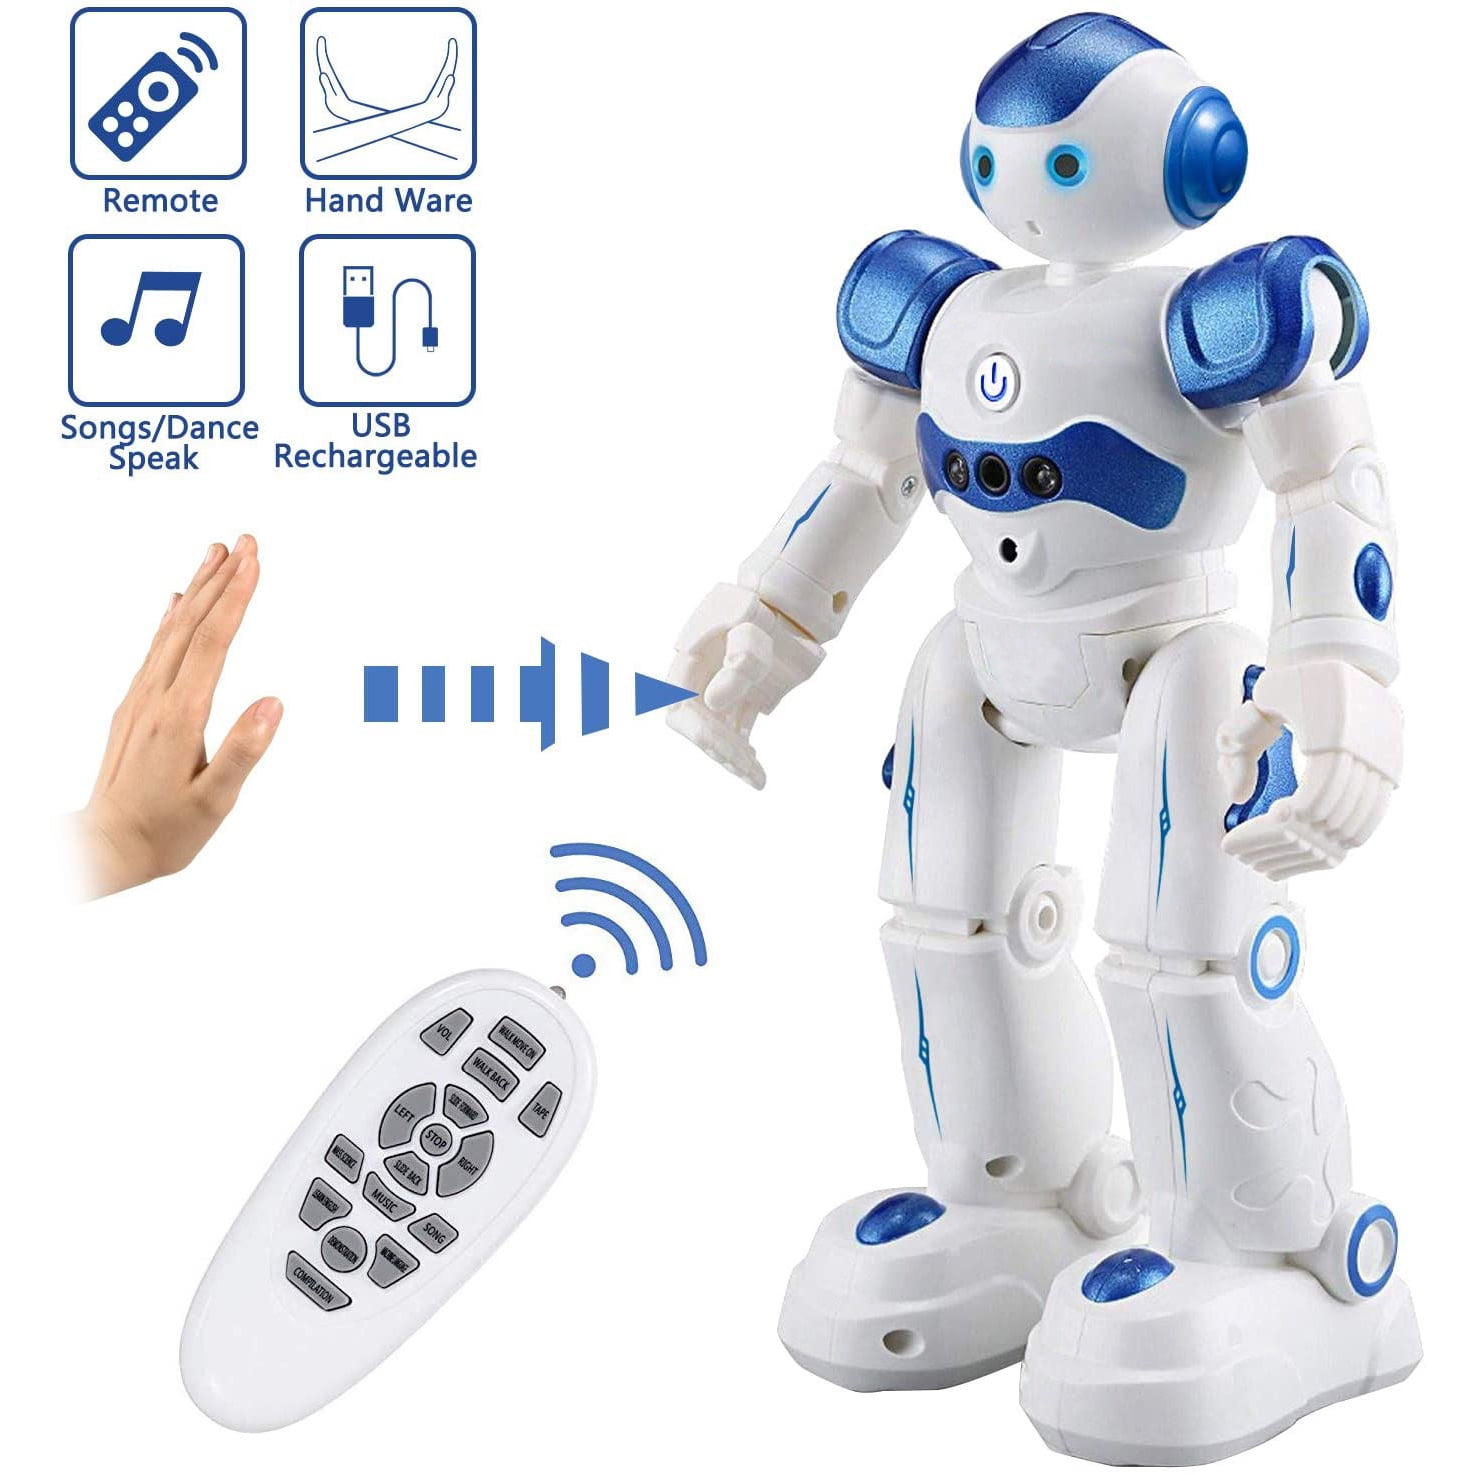 Smart Gesture Remote Control Programmable Dancing USB RC Robot Kid XMAS Toy Gift 